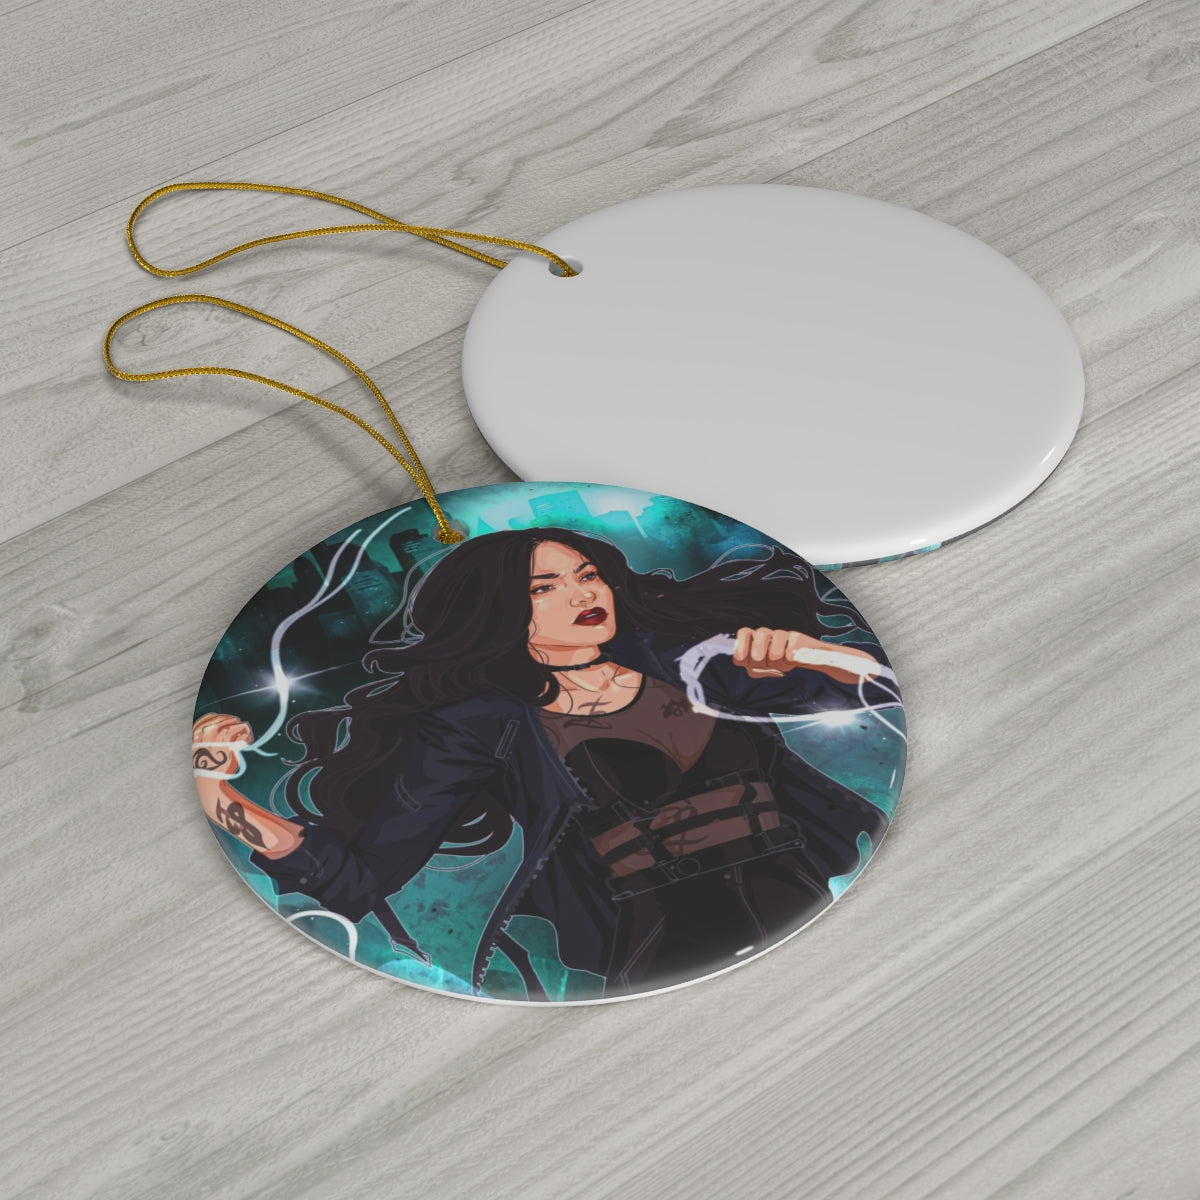 Izzy Lightwood Ceramic Ornament Shadowhunters Bookish Merch Reader Gifts for Her Best Friend Bookish